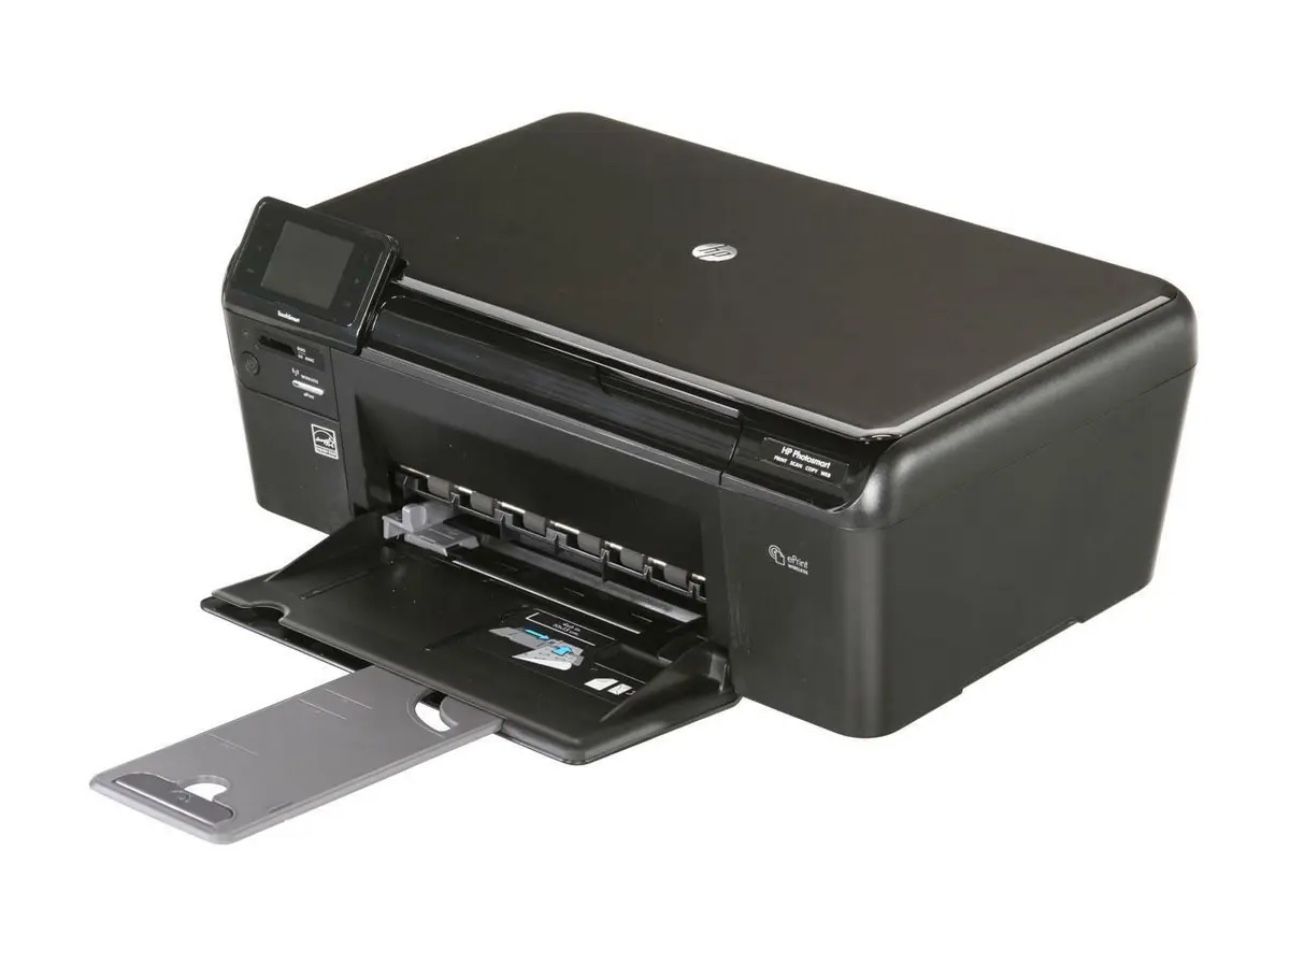 HP Photosmart D110a All-In-One Inkjet Printer